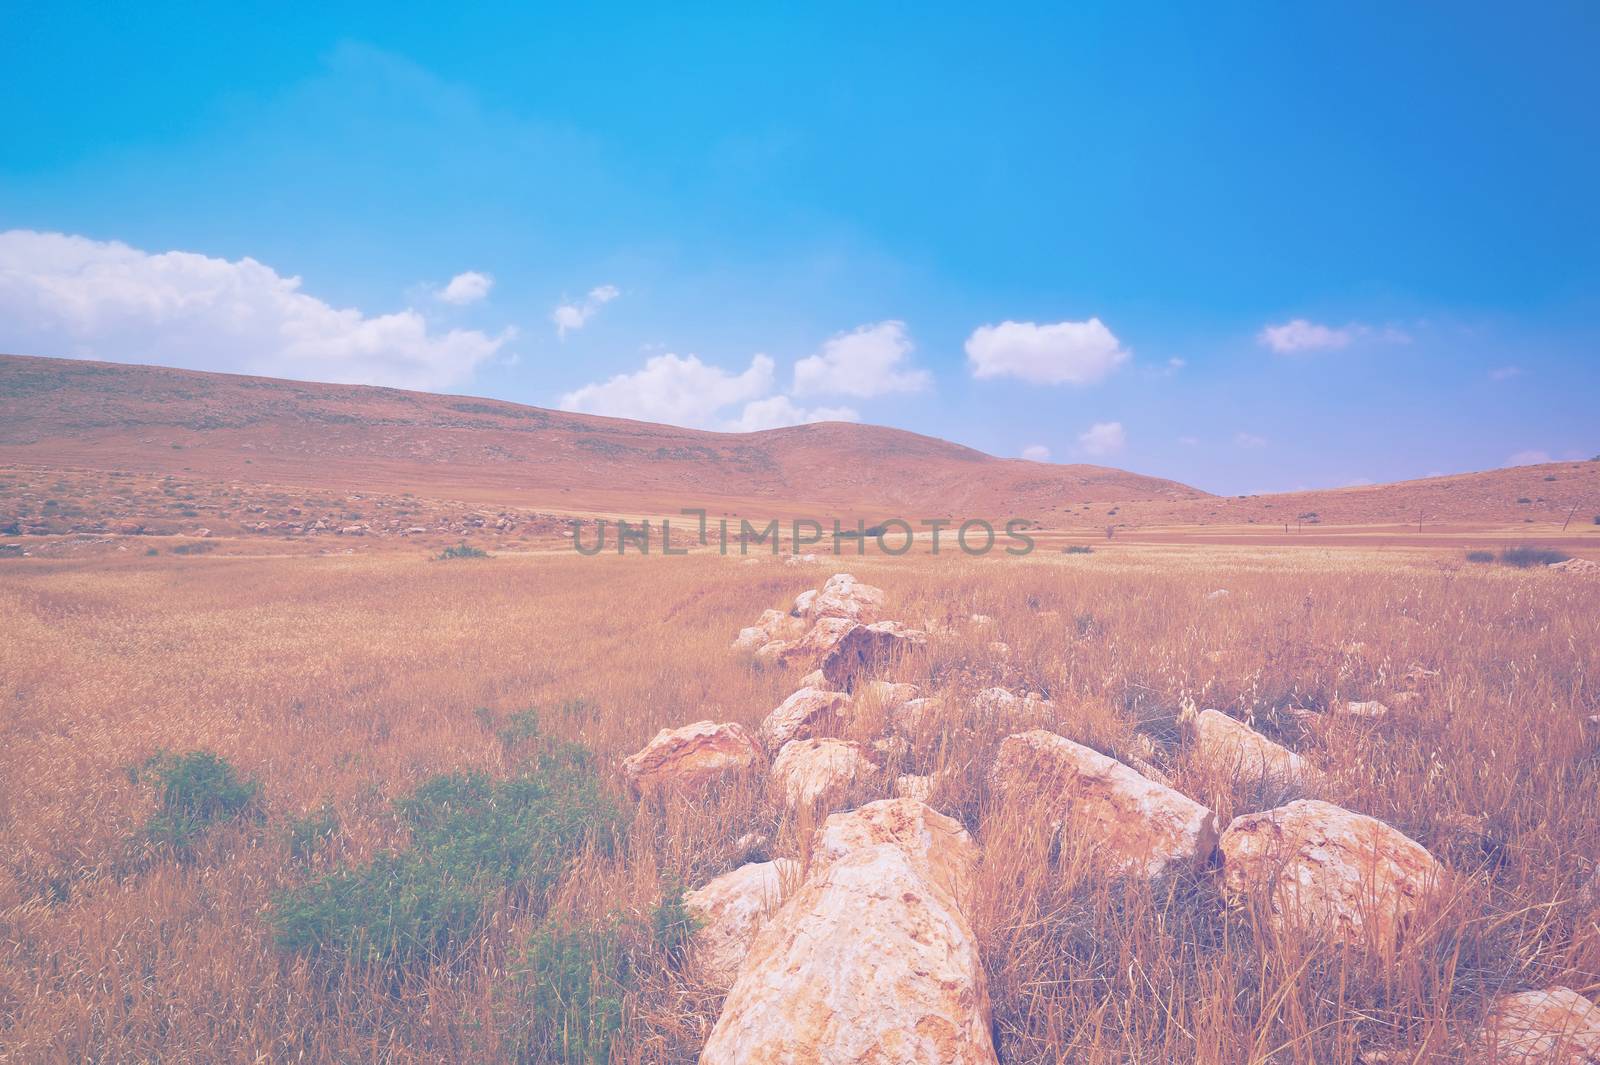 Deserted plain in Israel in faded color effect. Huge boulders in the Middle Eastern deserts.